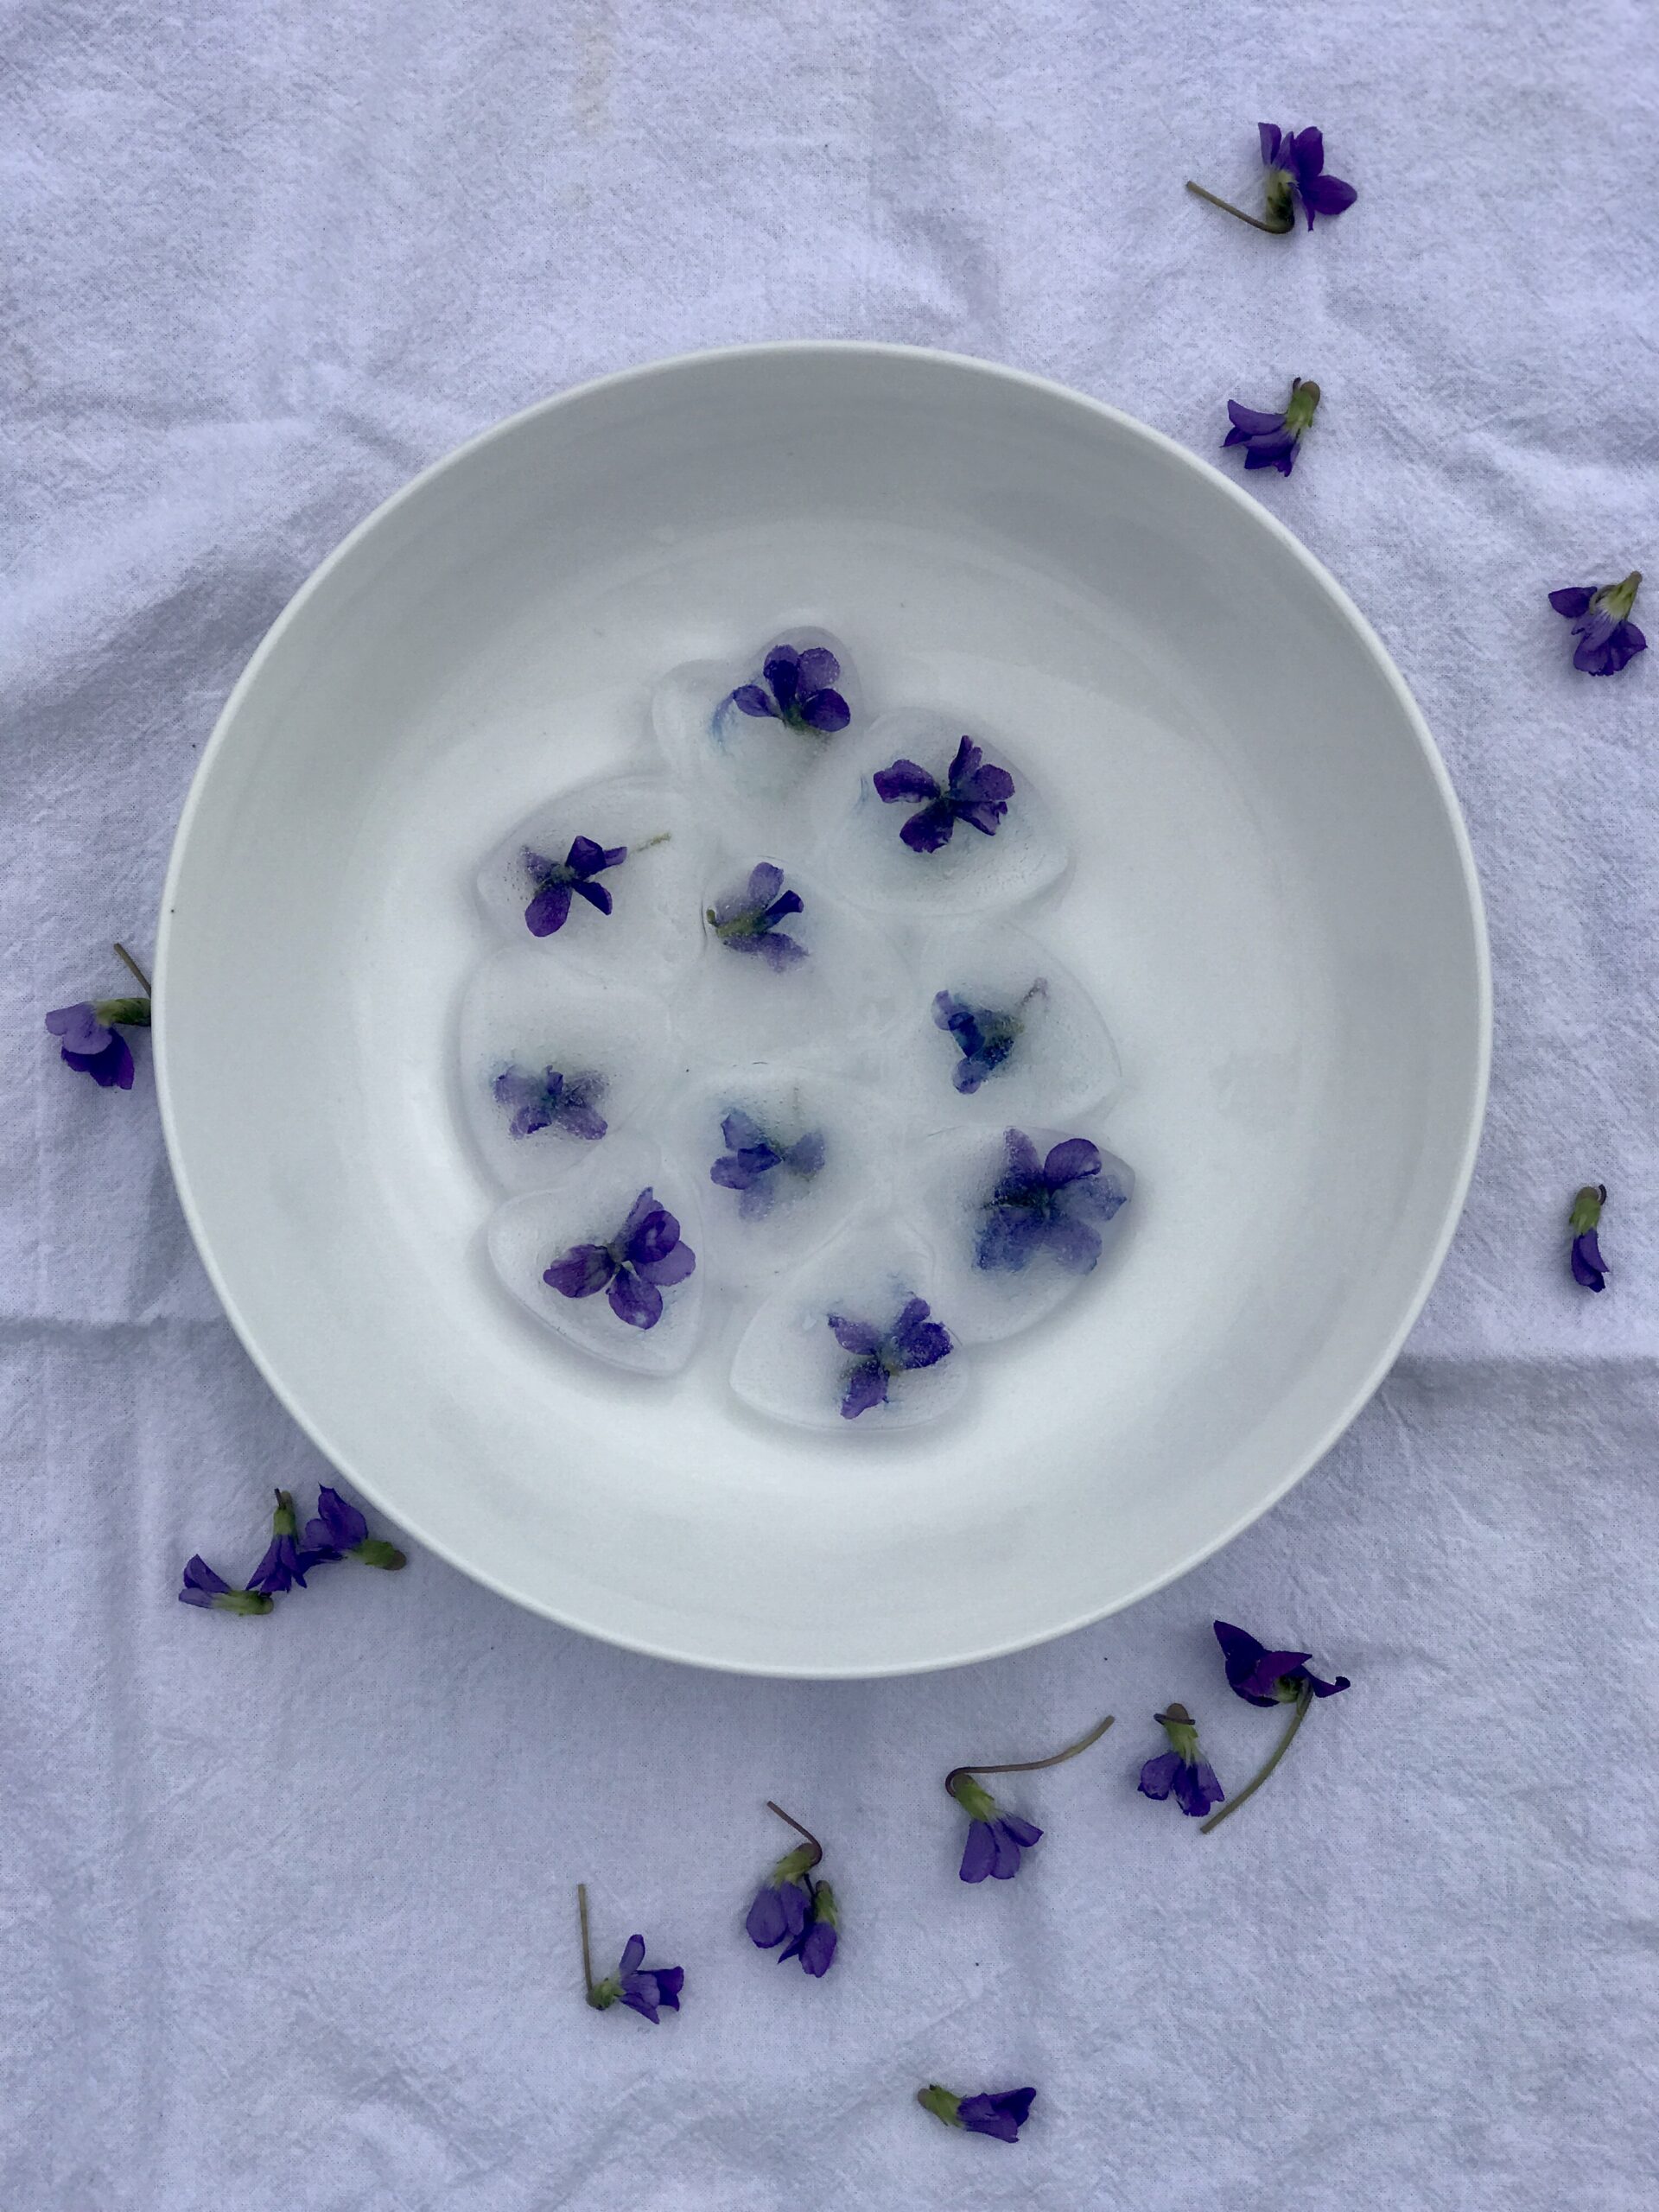 violet ice cubes in a bowl